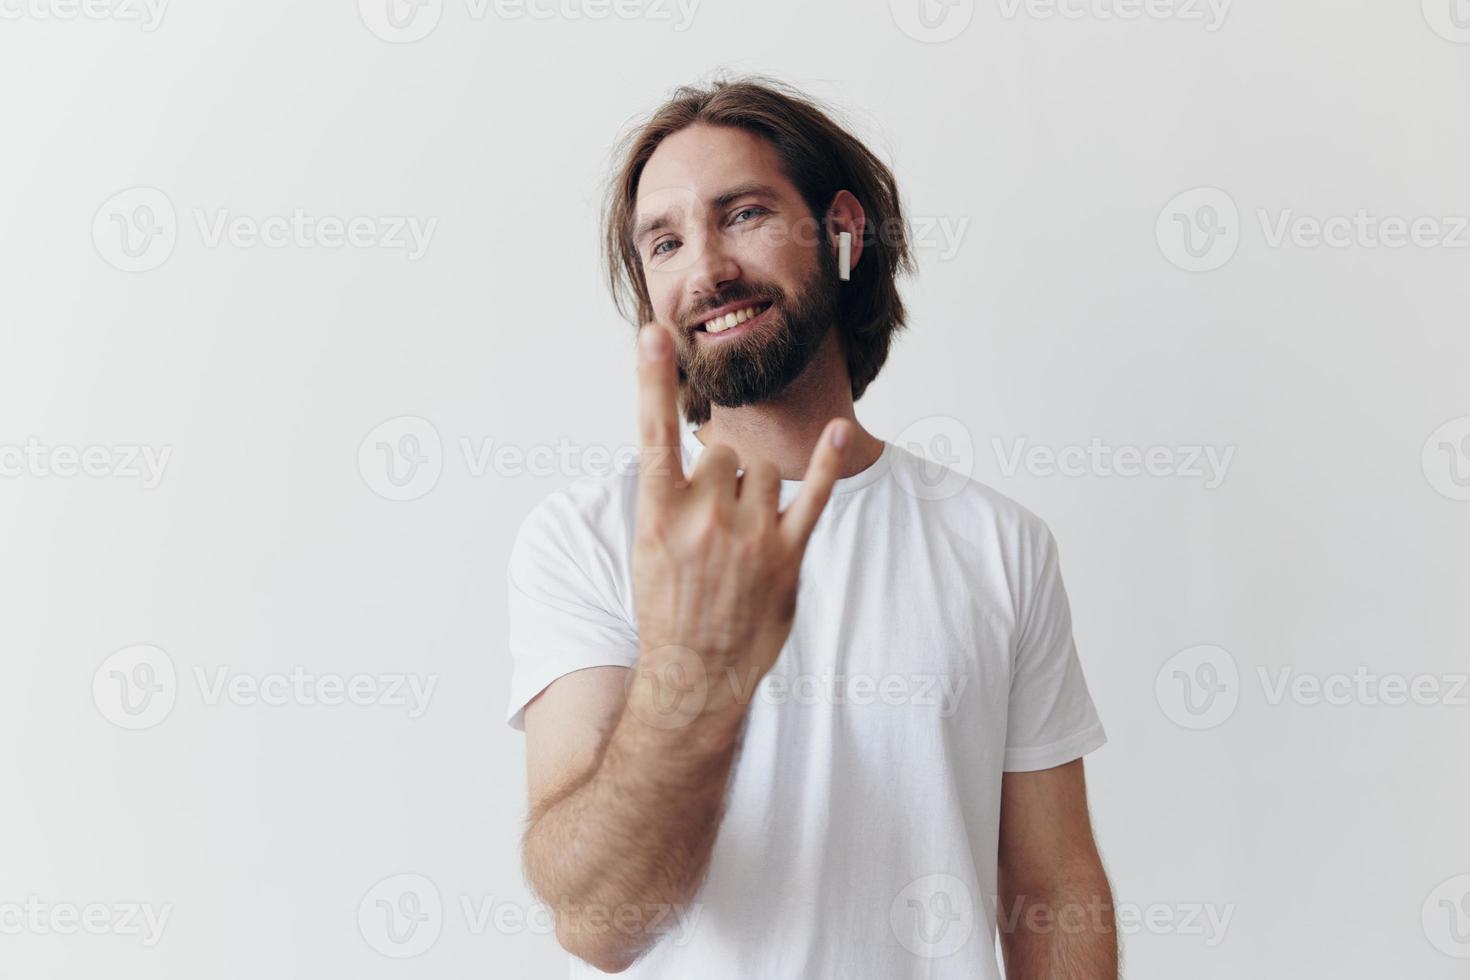 Stylish man in a white t-shirt with wireless headphones in his ears having fun listening to music smile on a white background lifestyle photo